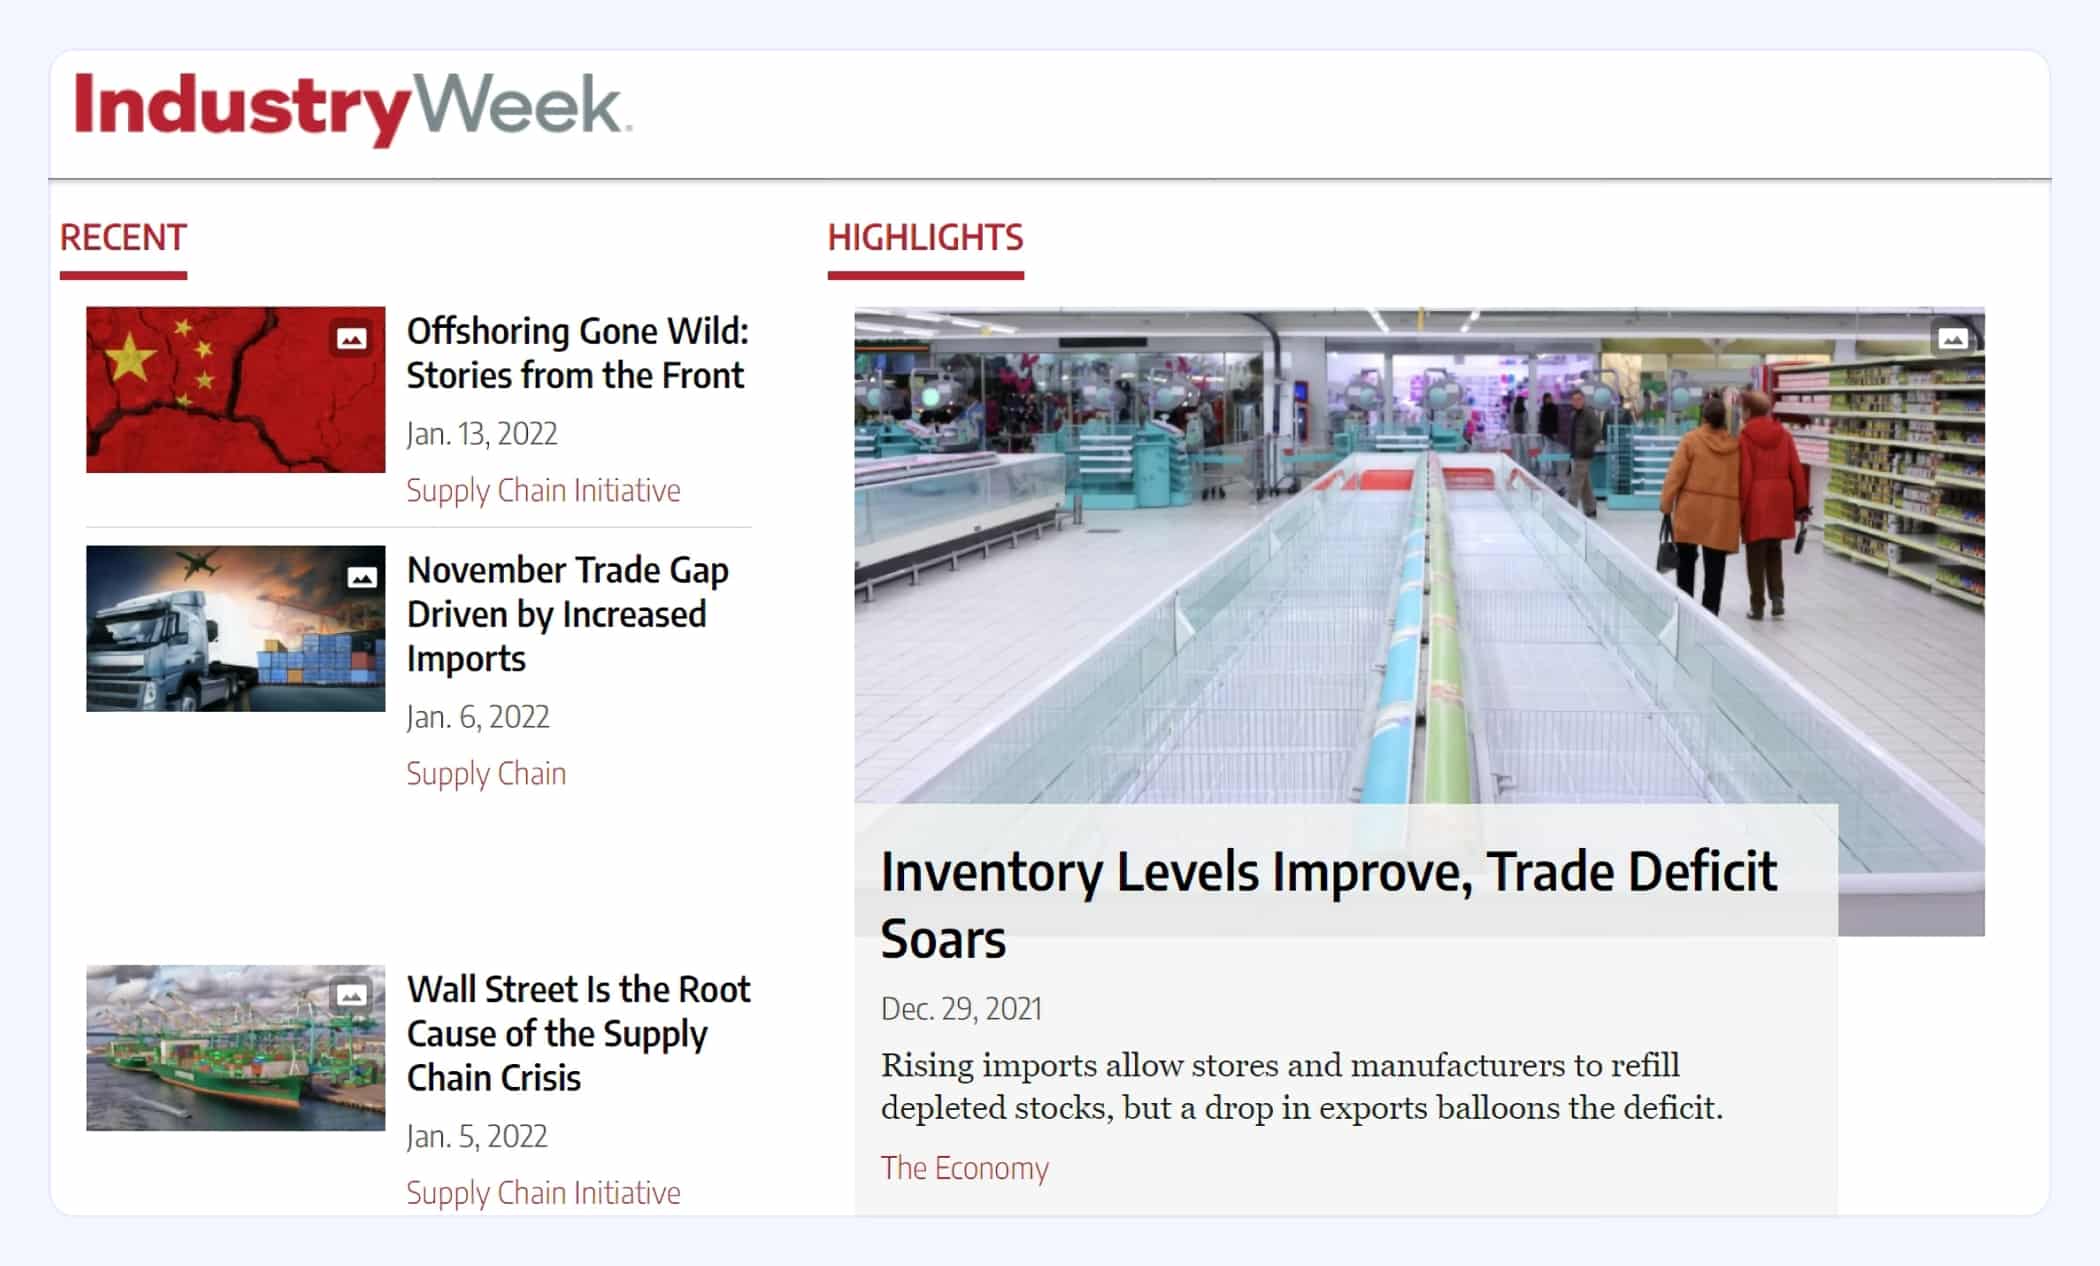 Industry Week's Main Page